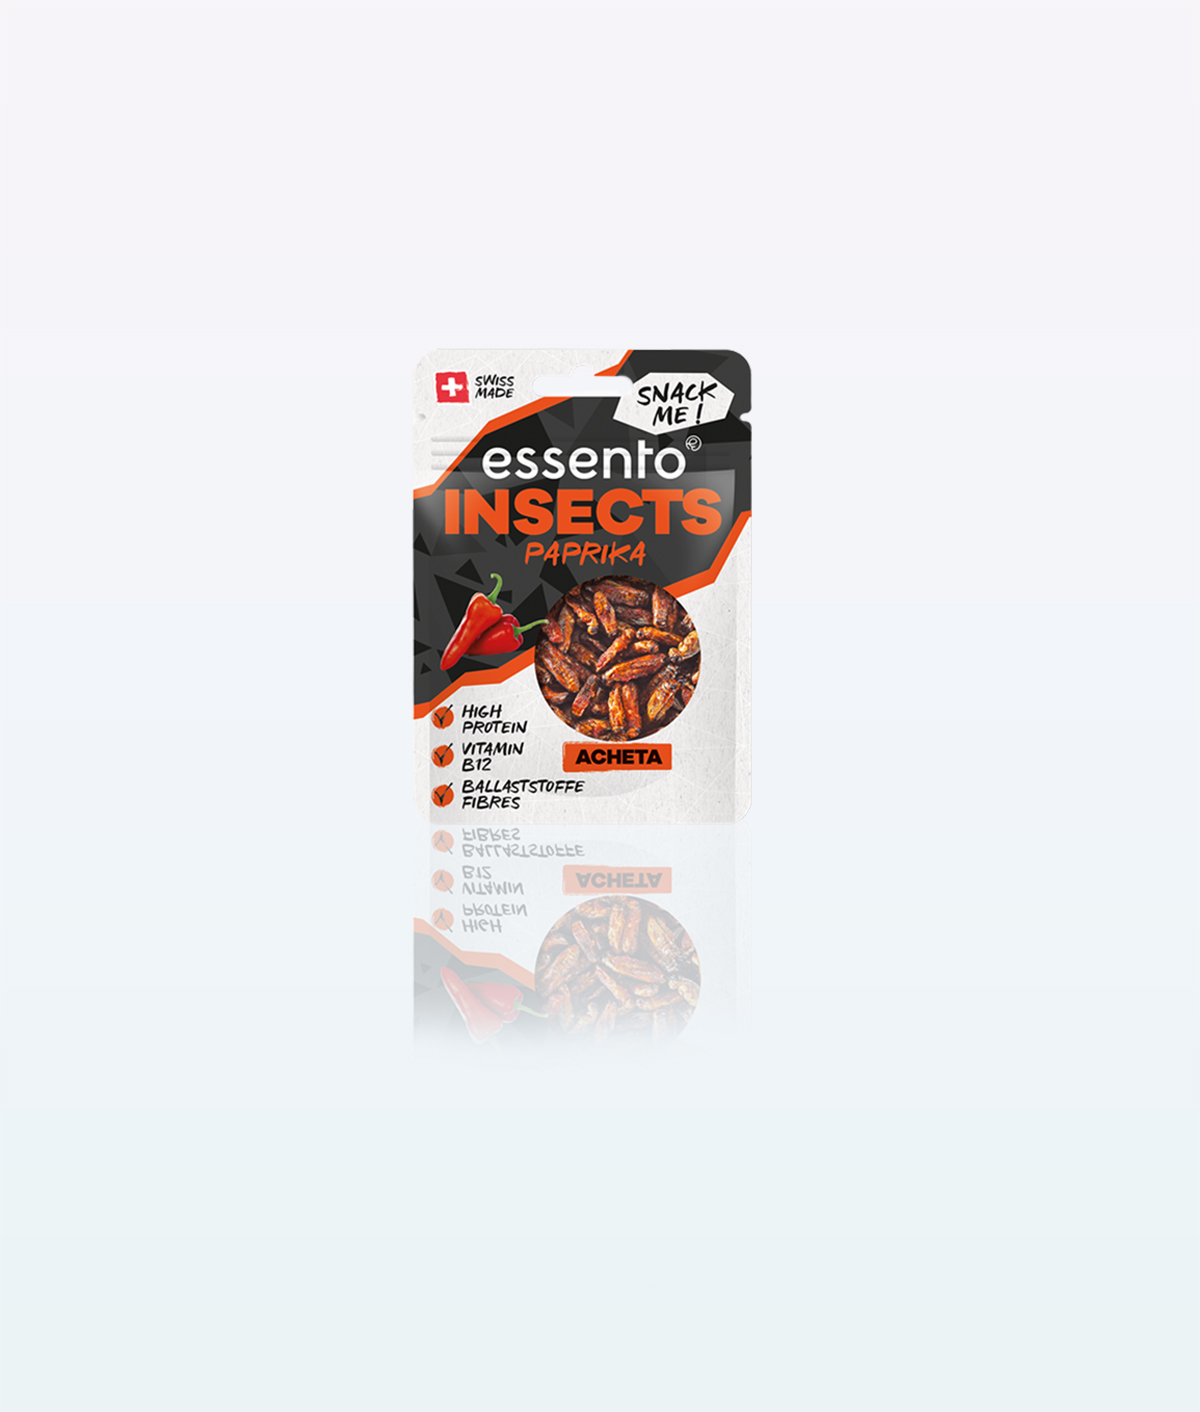 Essento Paprika Insect Snacks